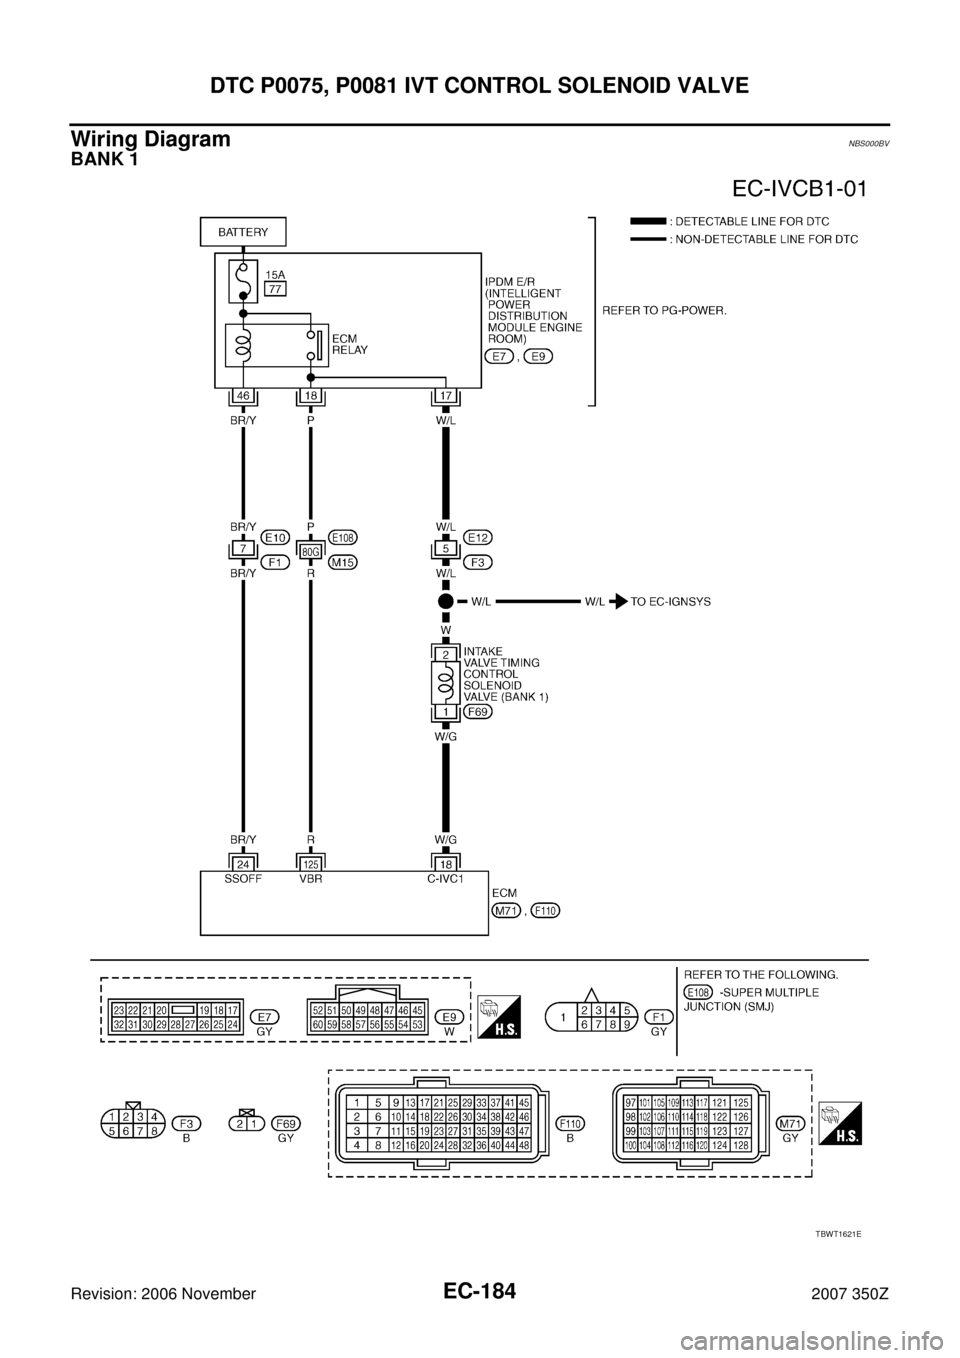 NISSAN 350Z 2007 Z33 Engine Control Owners Manual EC-184
DTC P0075, P0081 IVT CONTROL SOLENOID VALVE
Revision: 2006 November2007 350Z
Wiring DiagramNBS000BV
BANK 1
TBWT1621E 